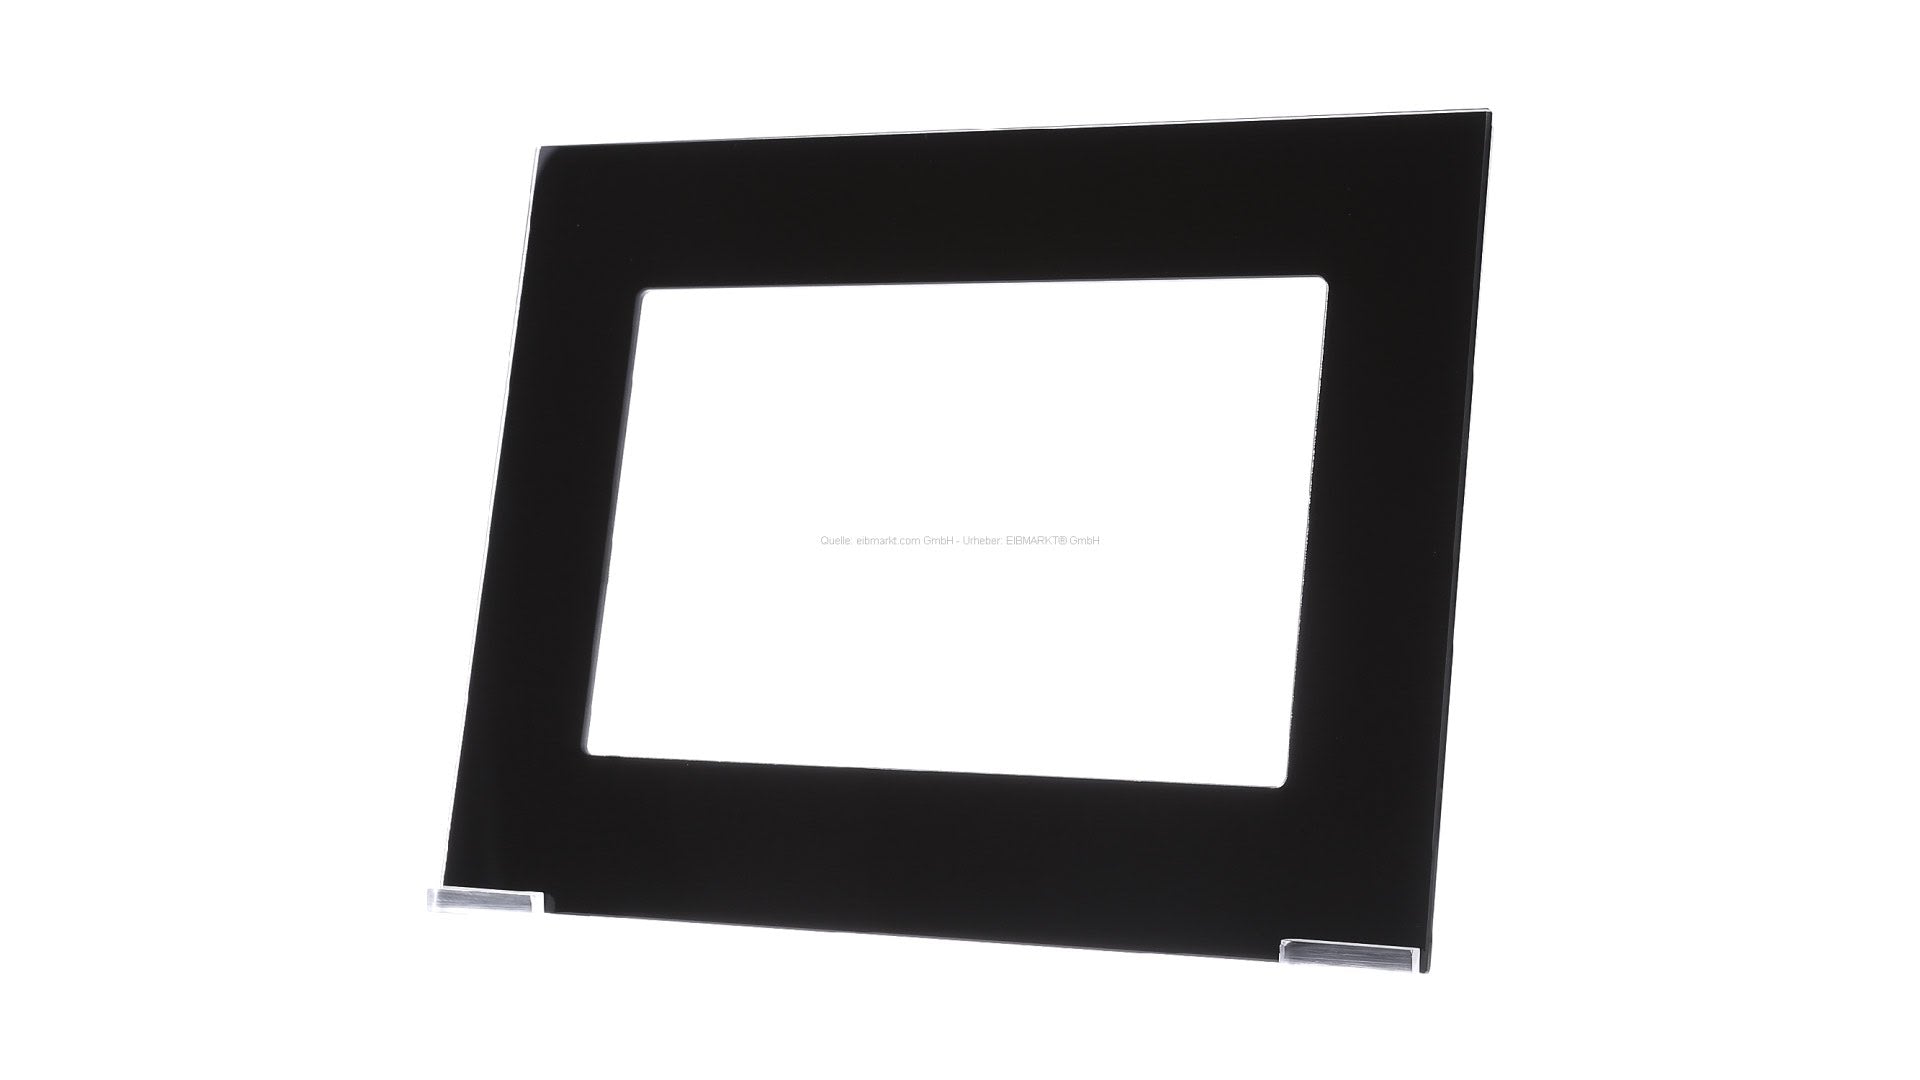 MDT Touchscreen & Visualization. Accessories for Touchpanel 10". VisuControl, ACC. 10" Cover frame, Stainless Steel Look